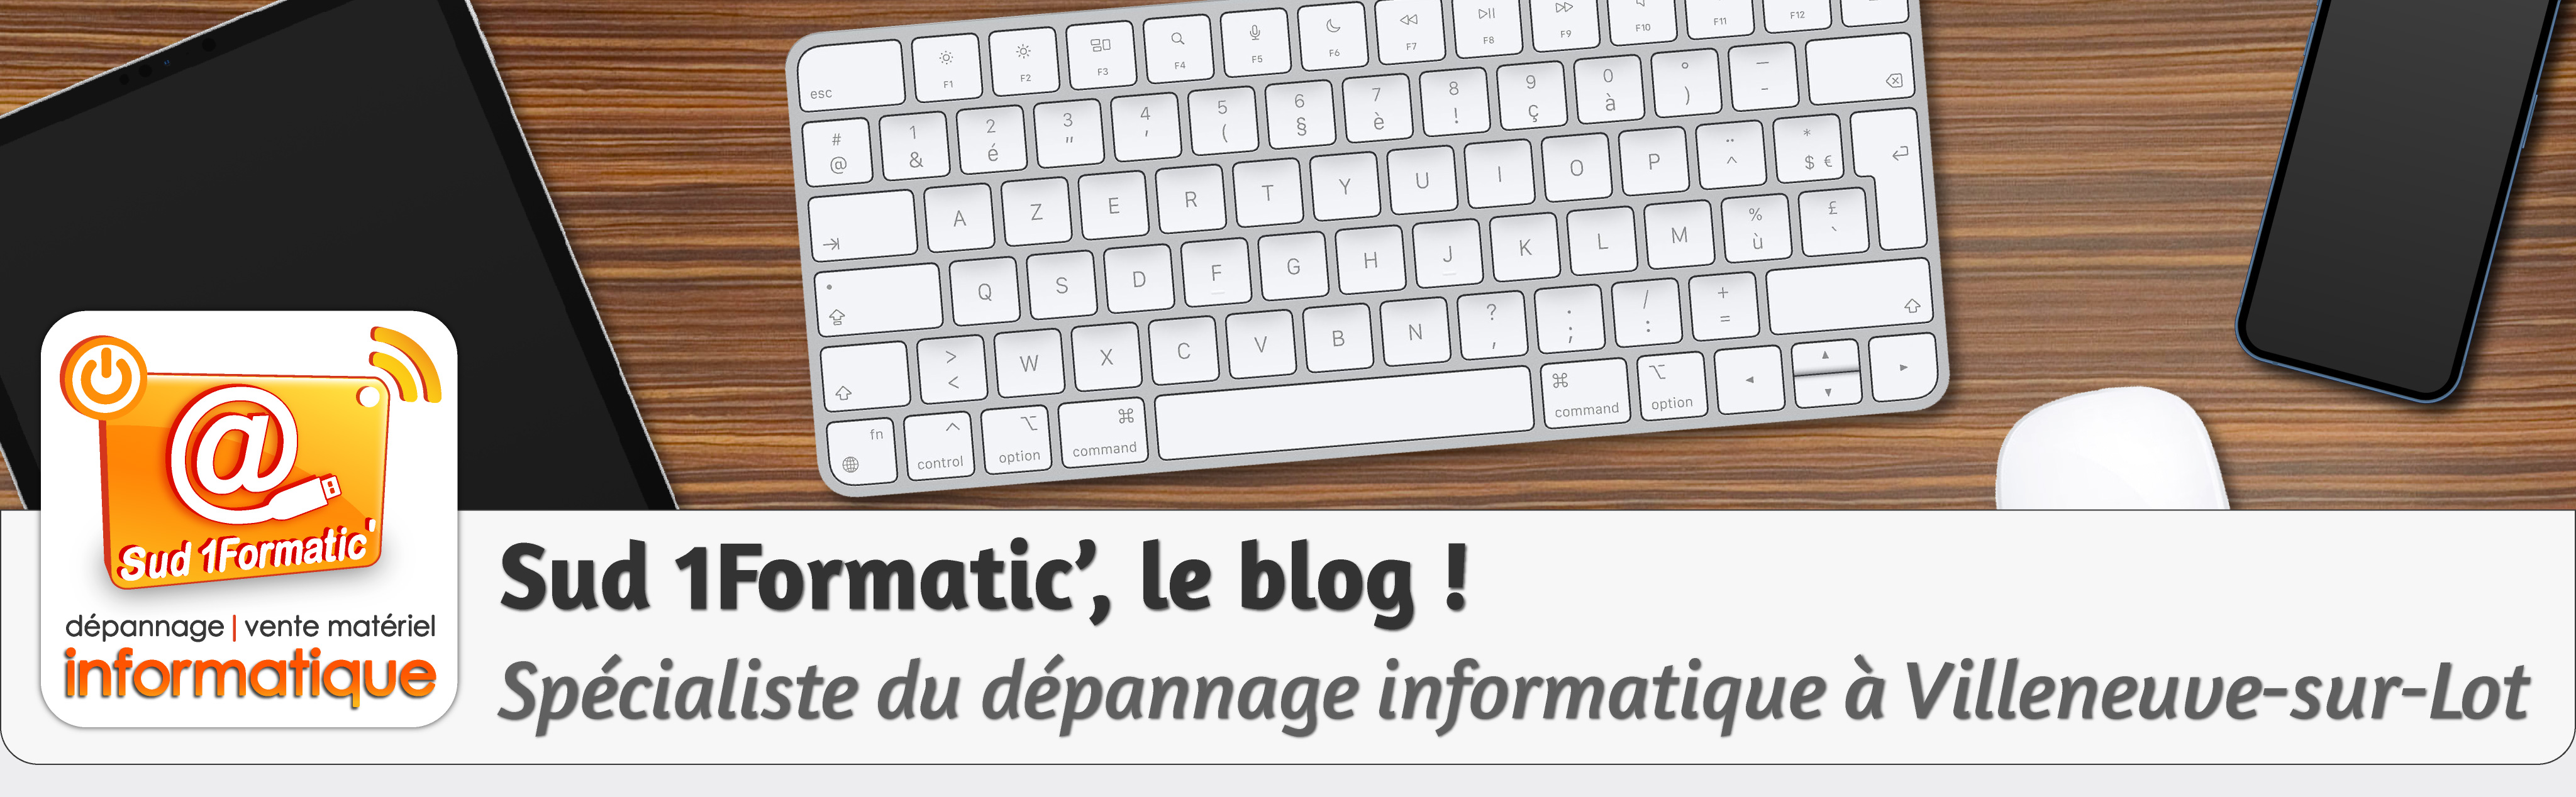 Sud 1Formatic', le blog !